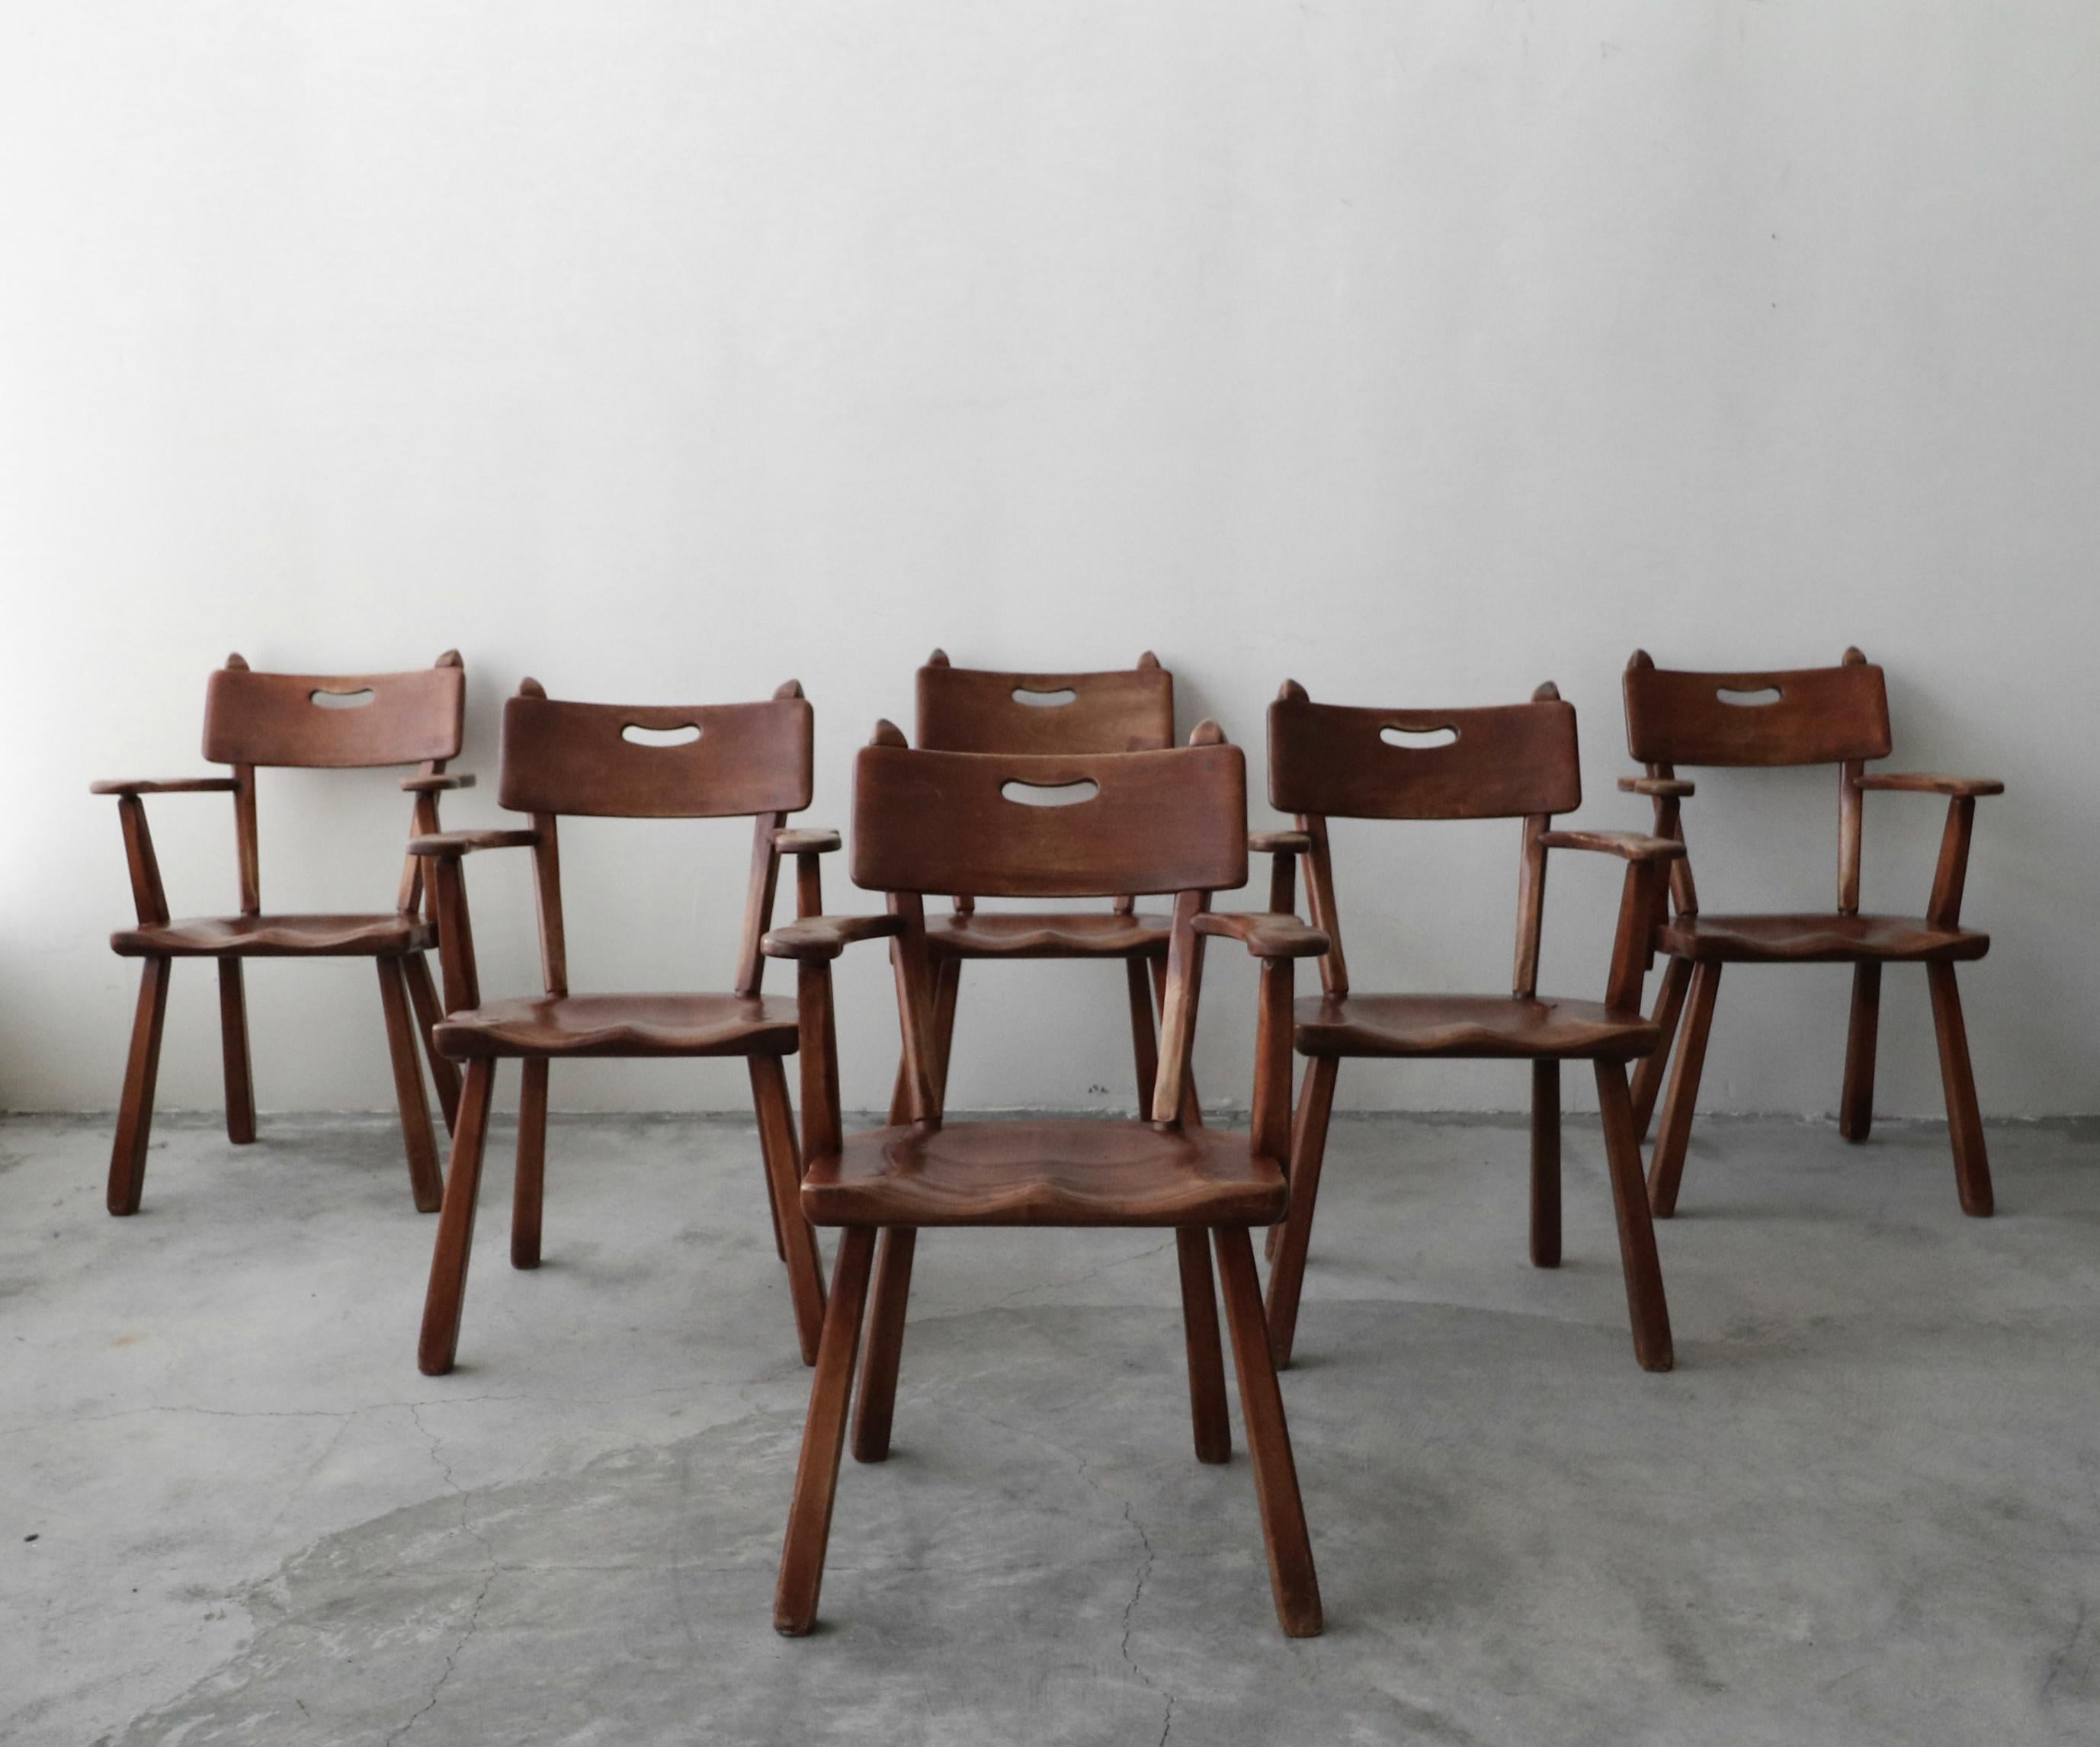 One of a kind set of handcrafted, midcentury Studio Craft chairs designed in 1956 by Herman de Vries for Cushman, tagged.

Constructed of solid maple wood and joined with dowels. Seamless construction, with beautiful lines, a truly unique set.